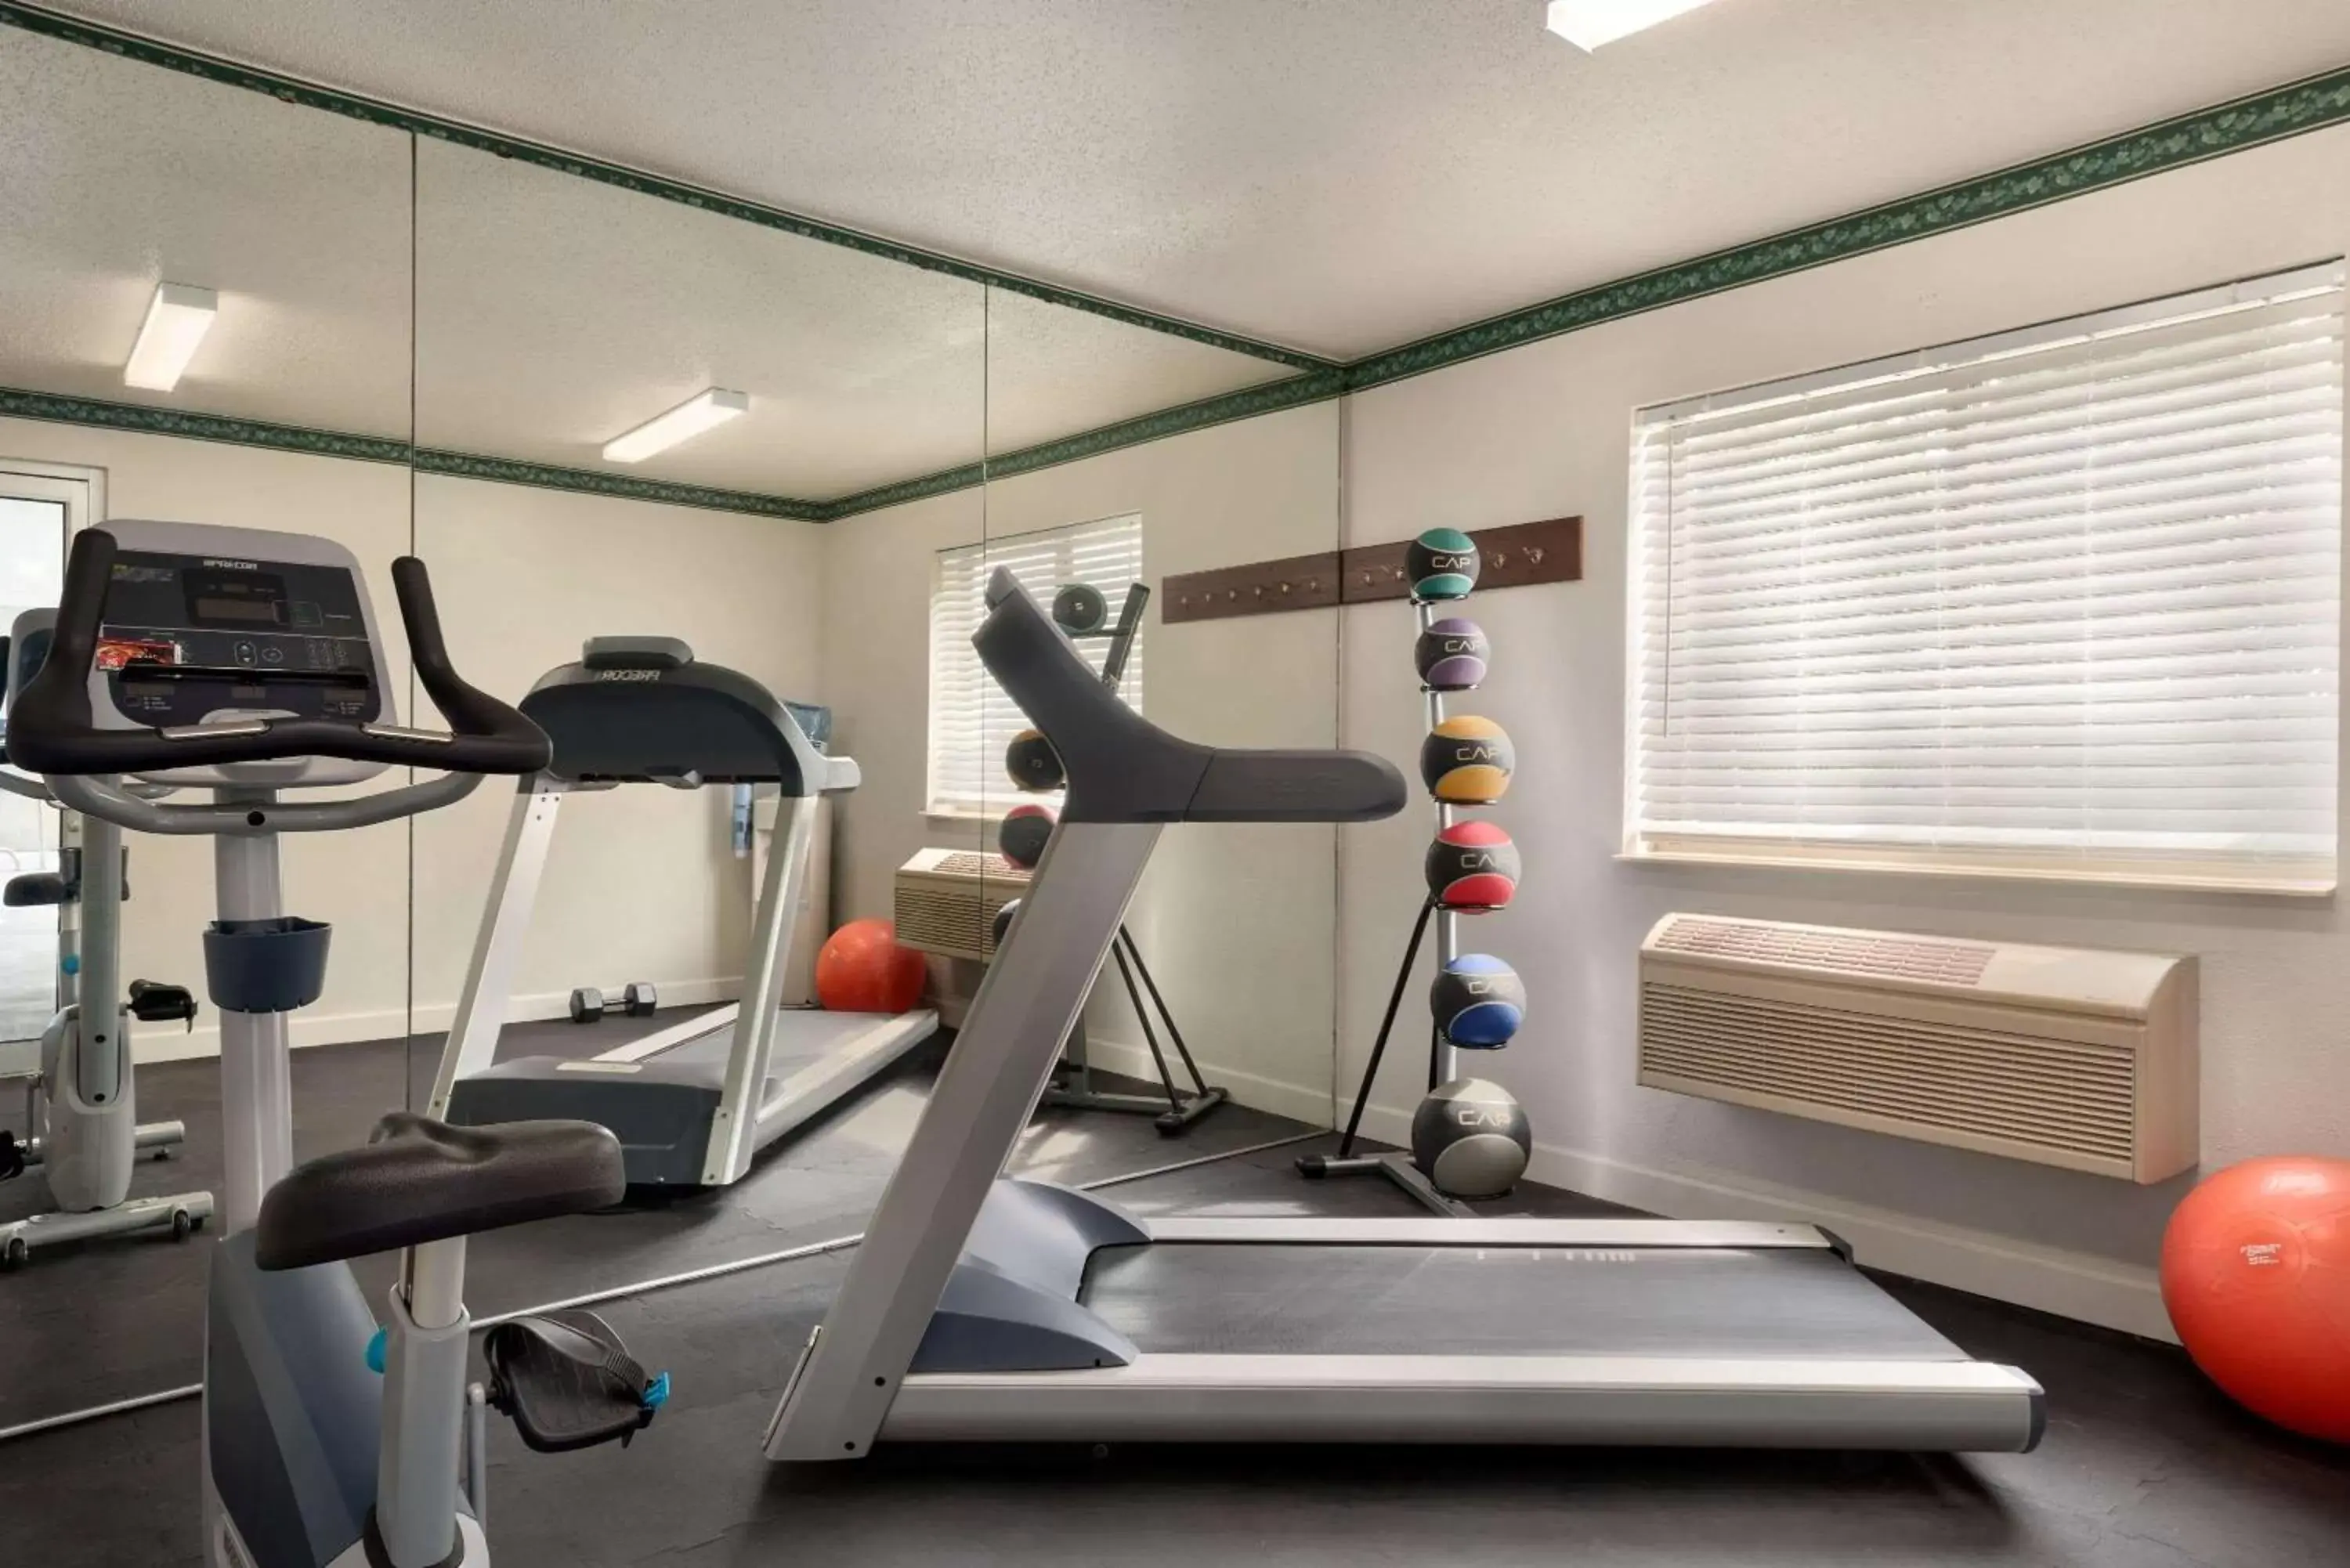 Fitness centre/facilities, Fitness Center/Facilities in Baymont by Wyndham Swanton